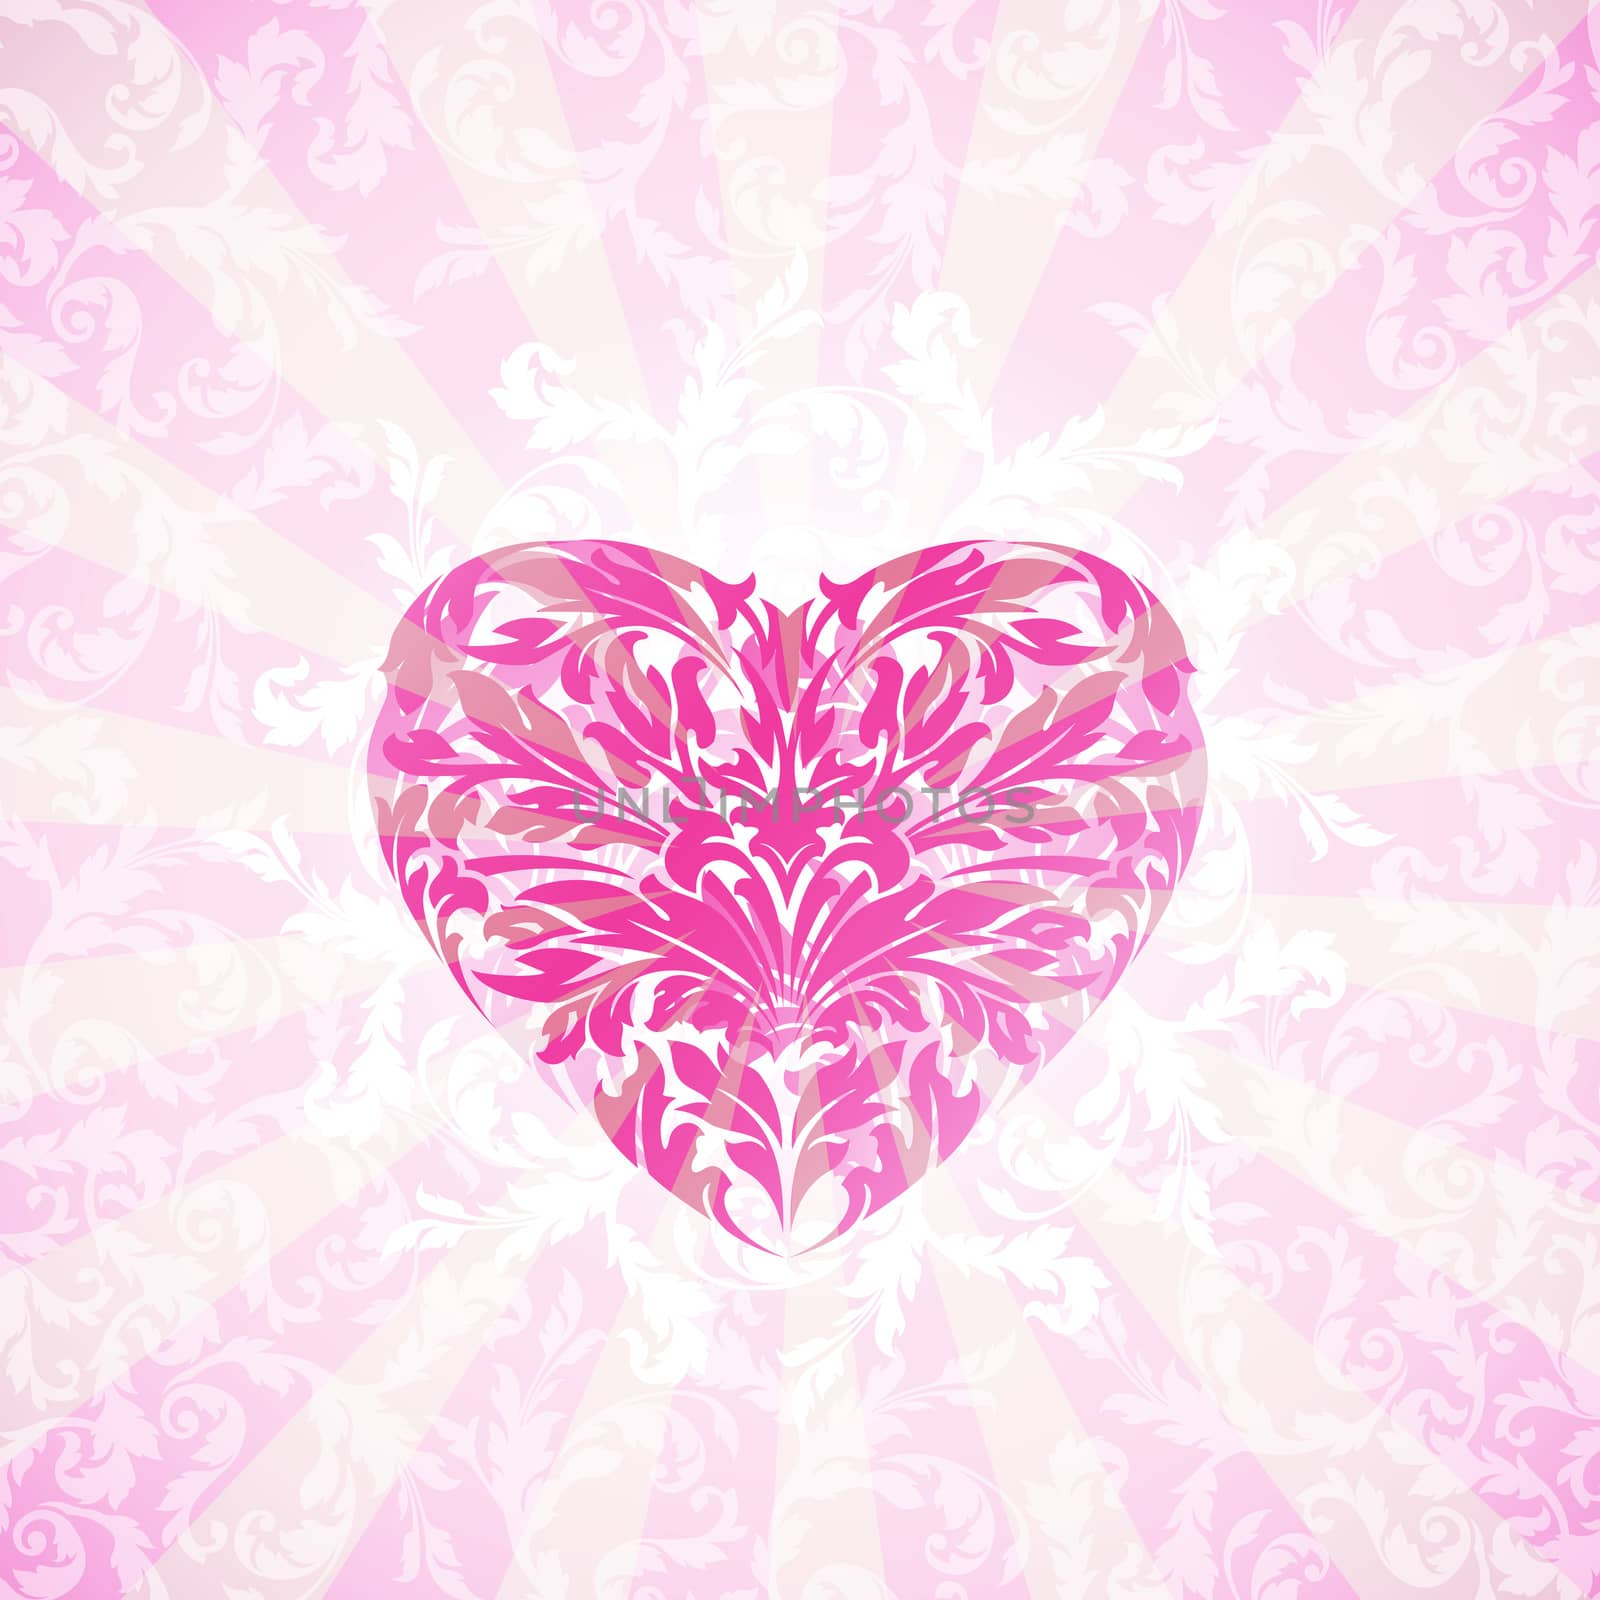 Happy Valentine's Day Floral Background by WaD